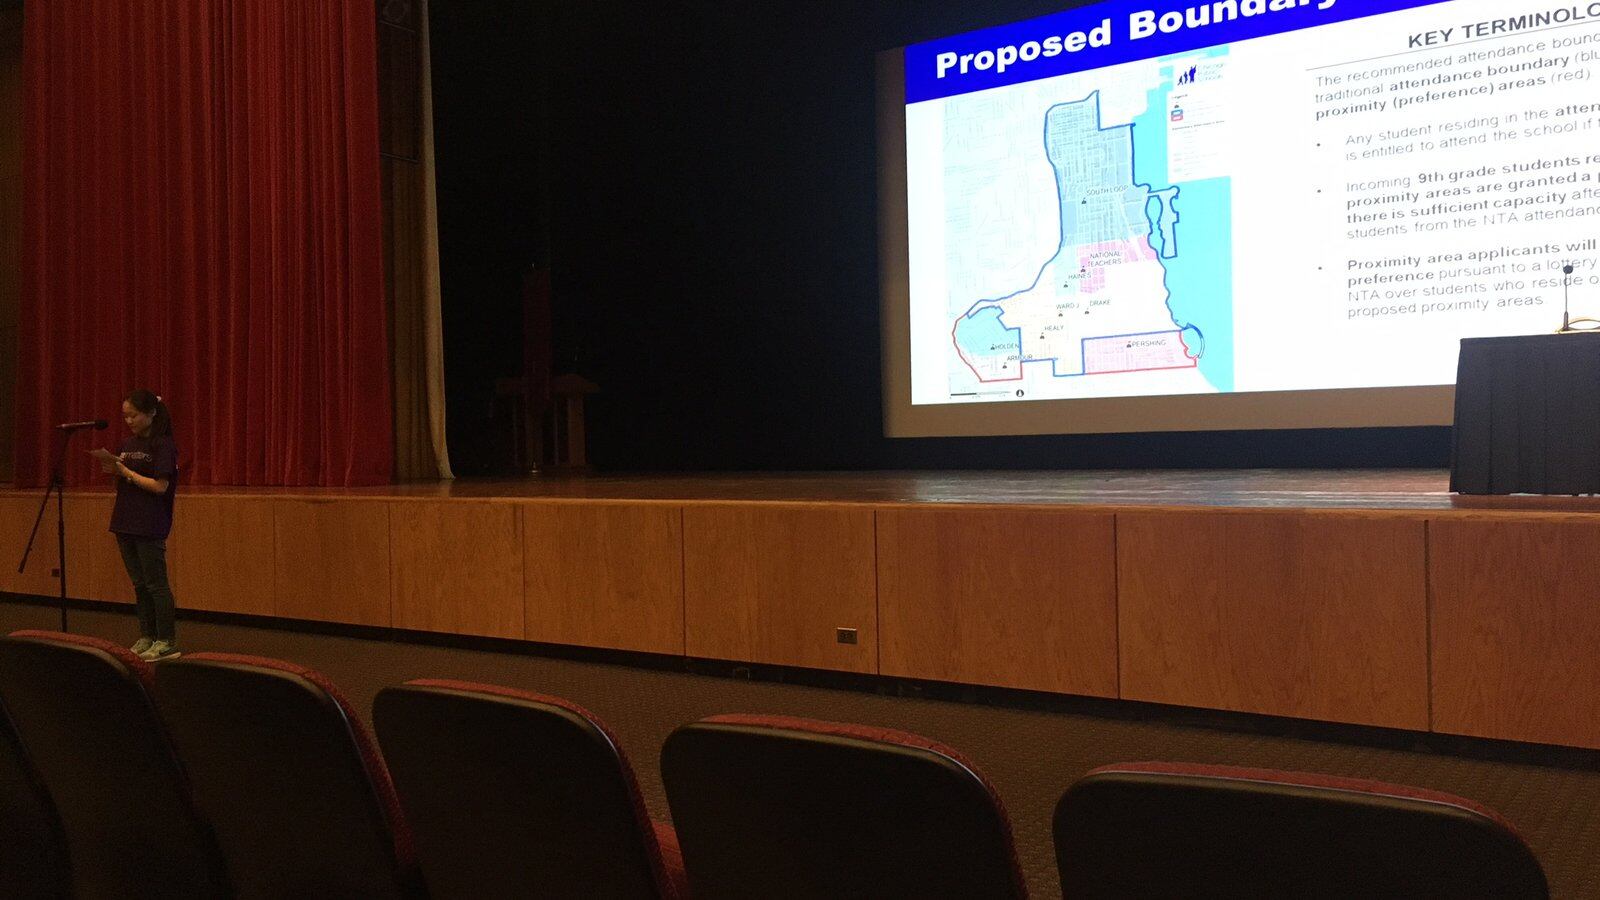 About 30 speakers weighed in on a boundary proposal for a new South Loop high school at a public meeting at IIT.